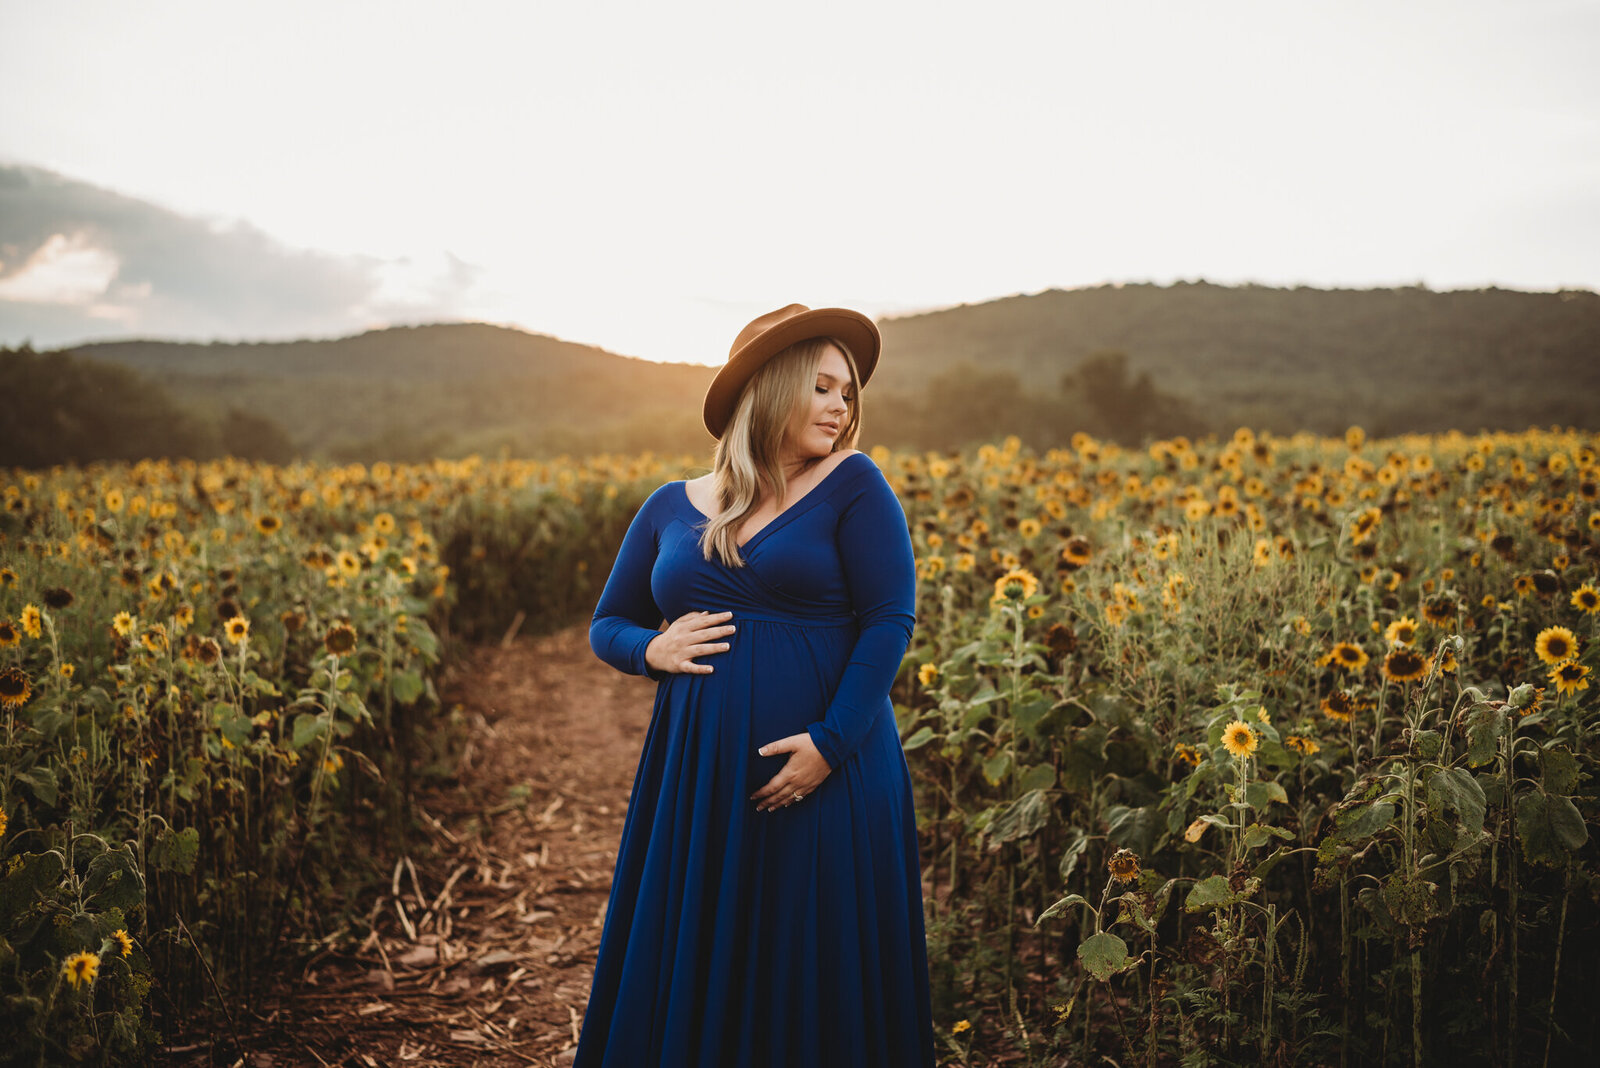 Fort Riley Maternity Photographer